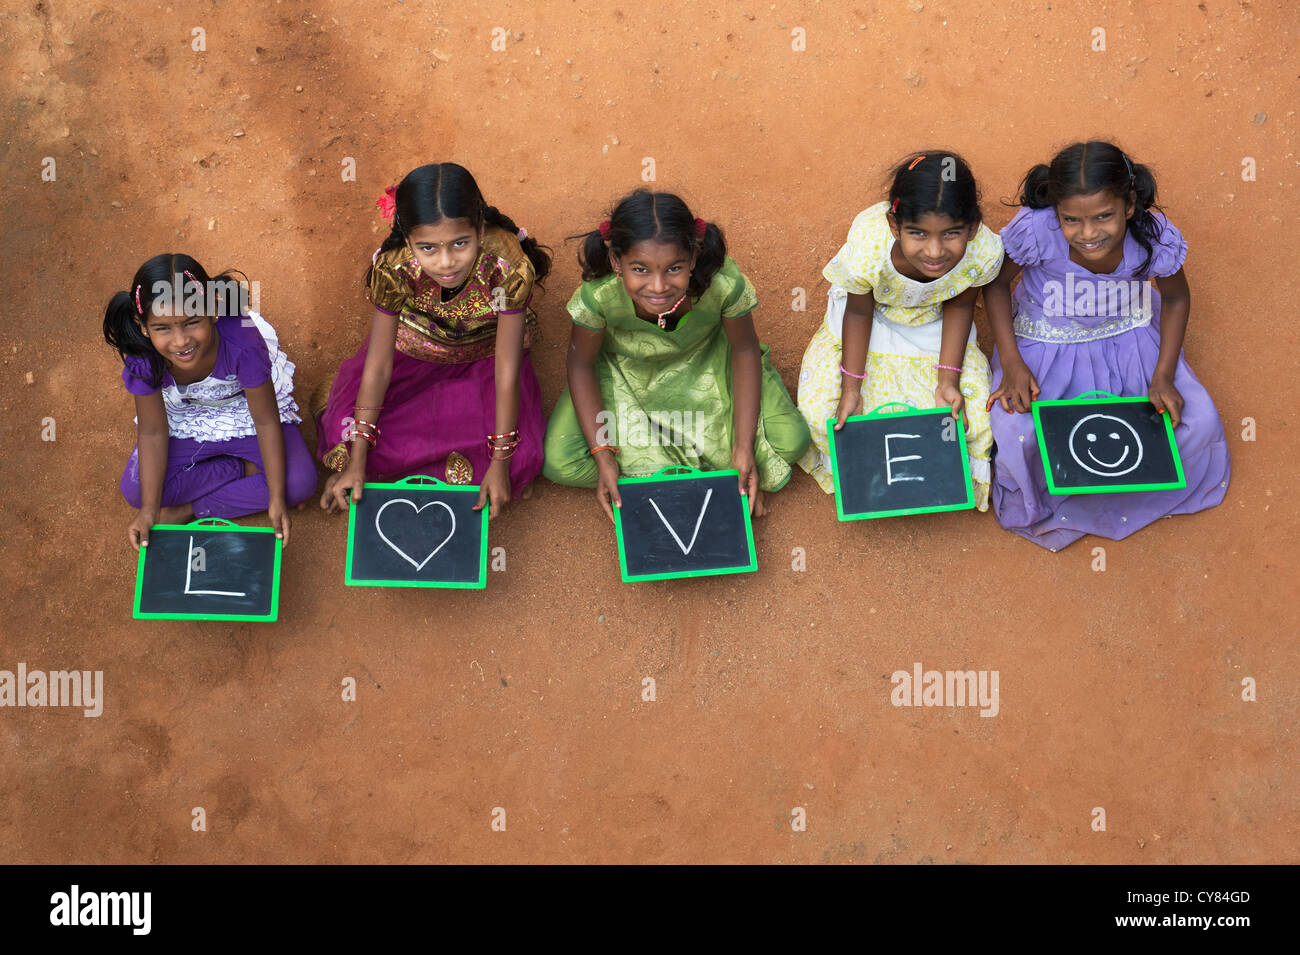 Five Indian village girls with LOVE and a smiley face written on a chalkboard in a rural indian village. Andhra Pradesh, India Stock Photo